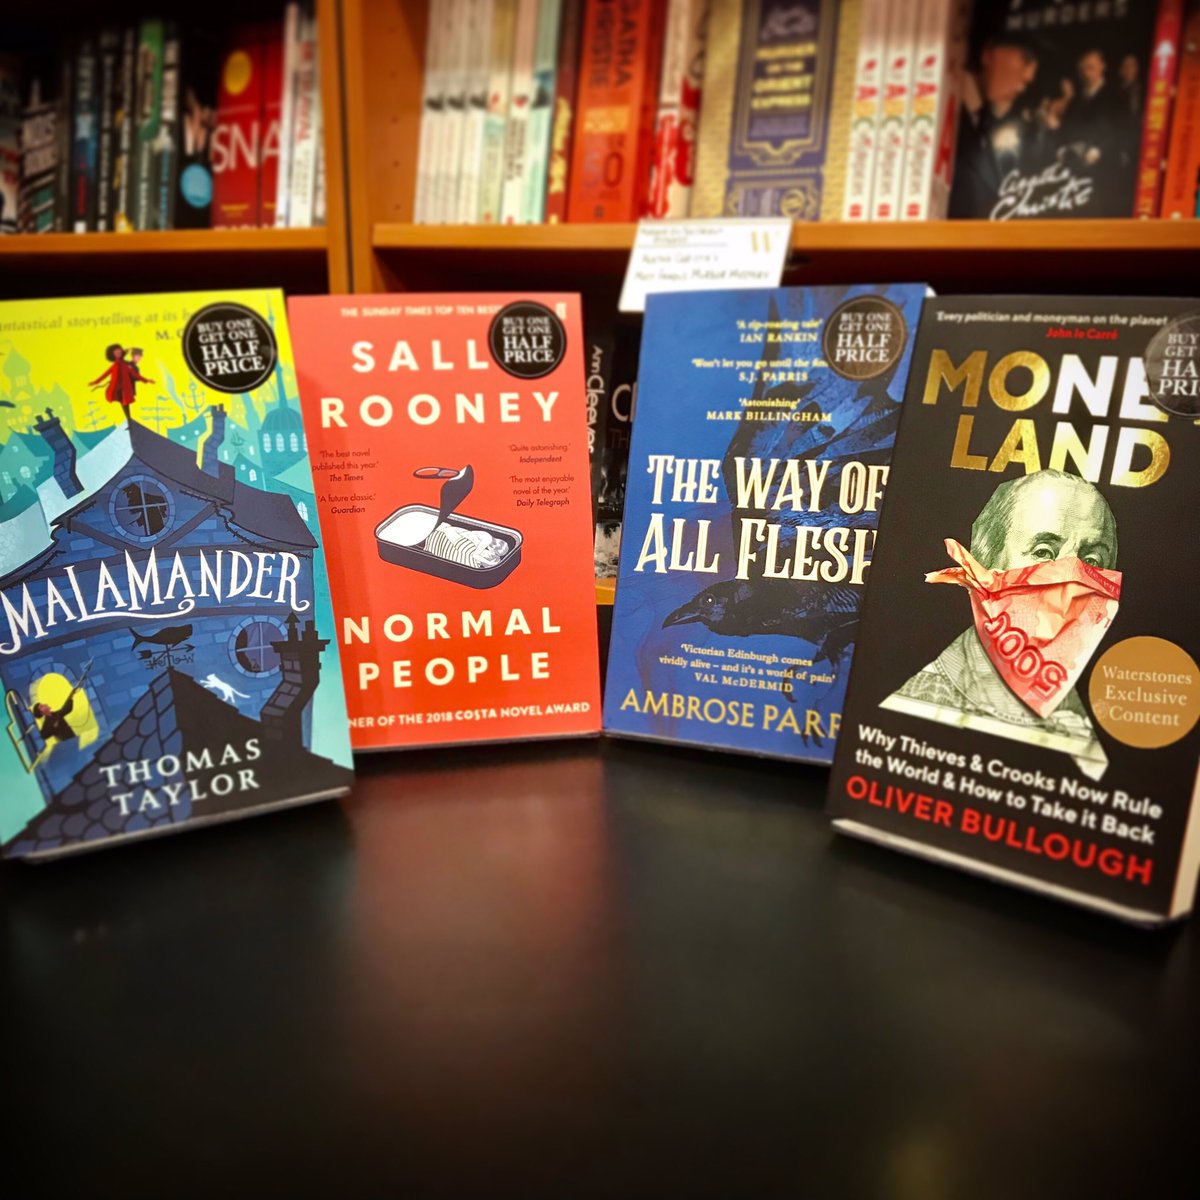 Our booksellers are rating our latest and greatest books of the month!
The page-turning #Malamander by @ThomasHTaylor comes highly recommended - Ann
The creeping gothic #TheWayOfAllFlesh by @ambroseparry will grasp you until it’s thrilling end - Sean